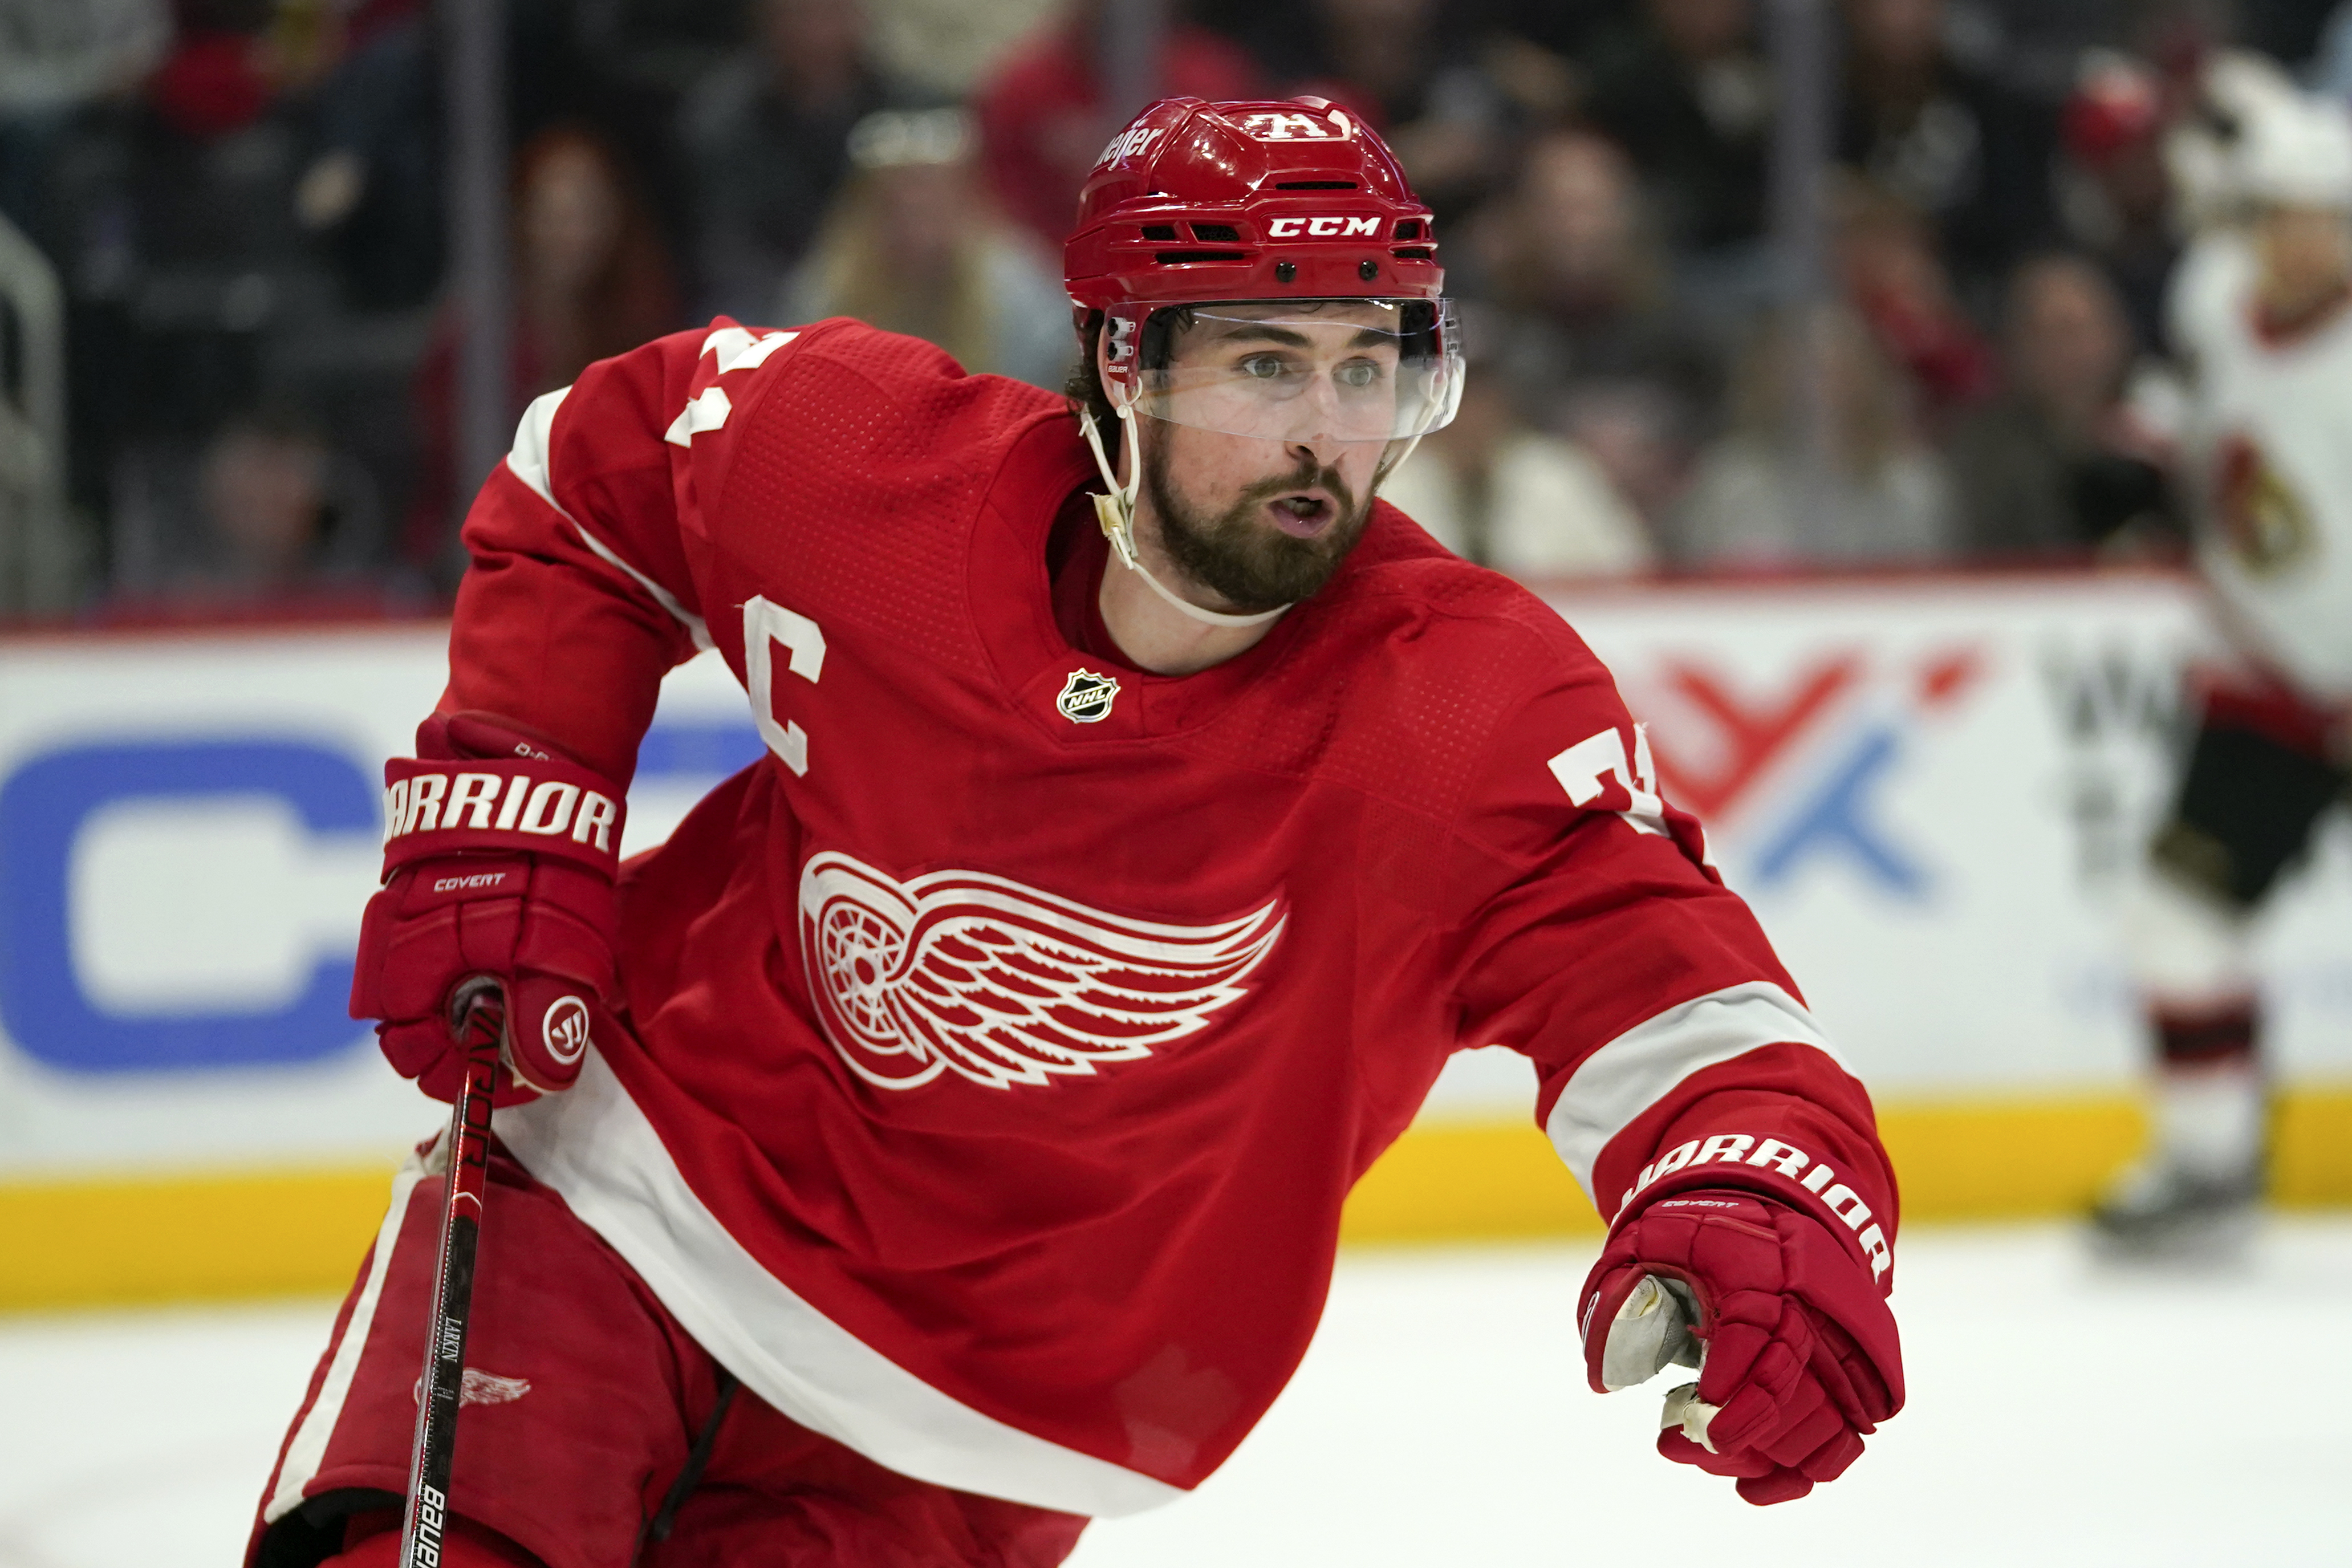 How to get a Dylan Larkin jersey now that he has signed an 8-year